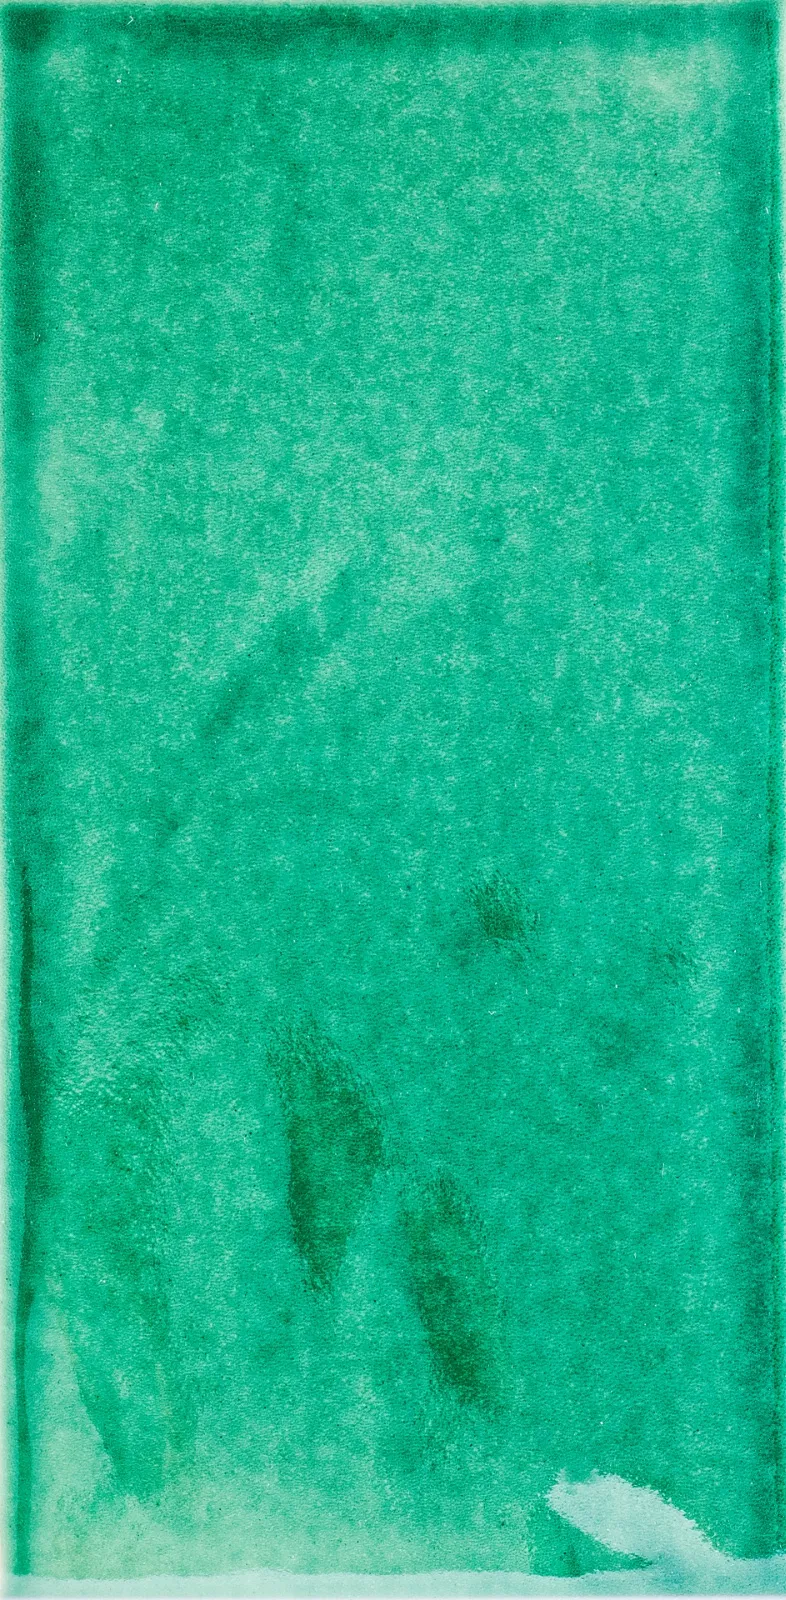 <h3>VERDE CLARO</h3><small>Colections and Tiles, Aires Mateus</small>